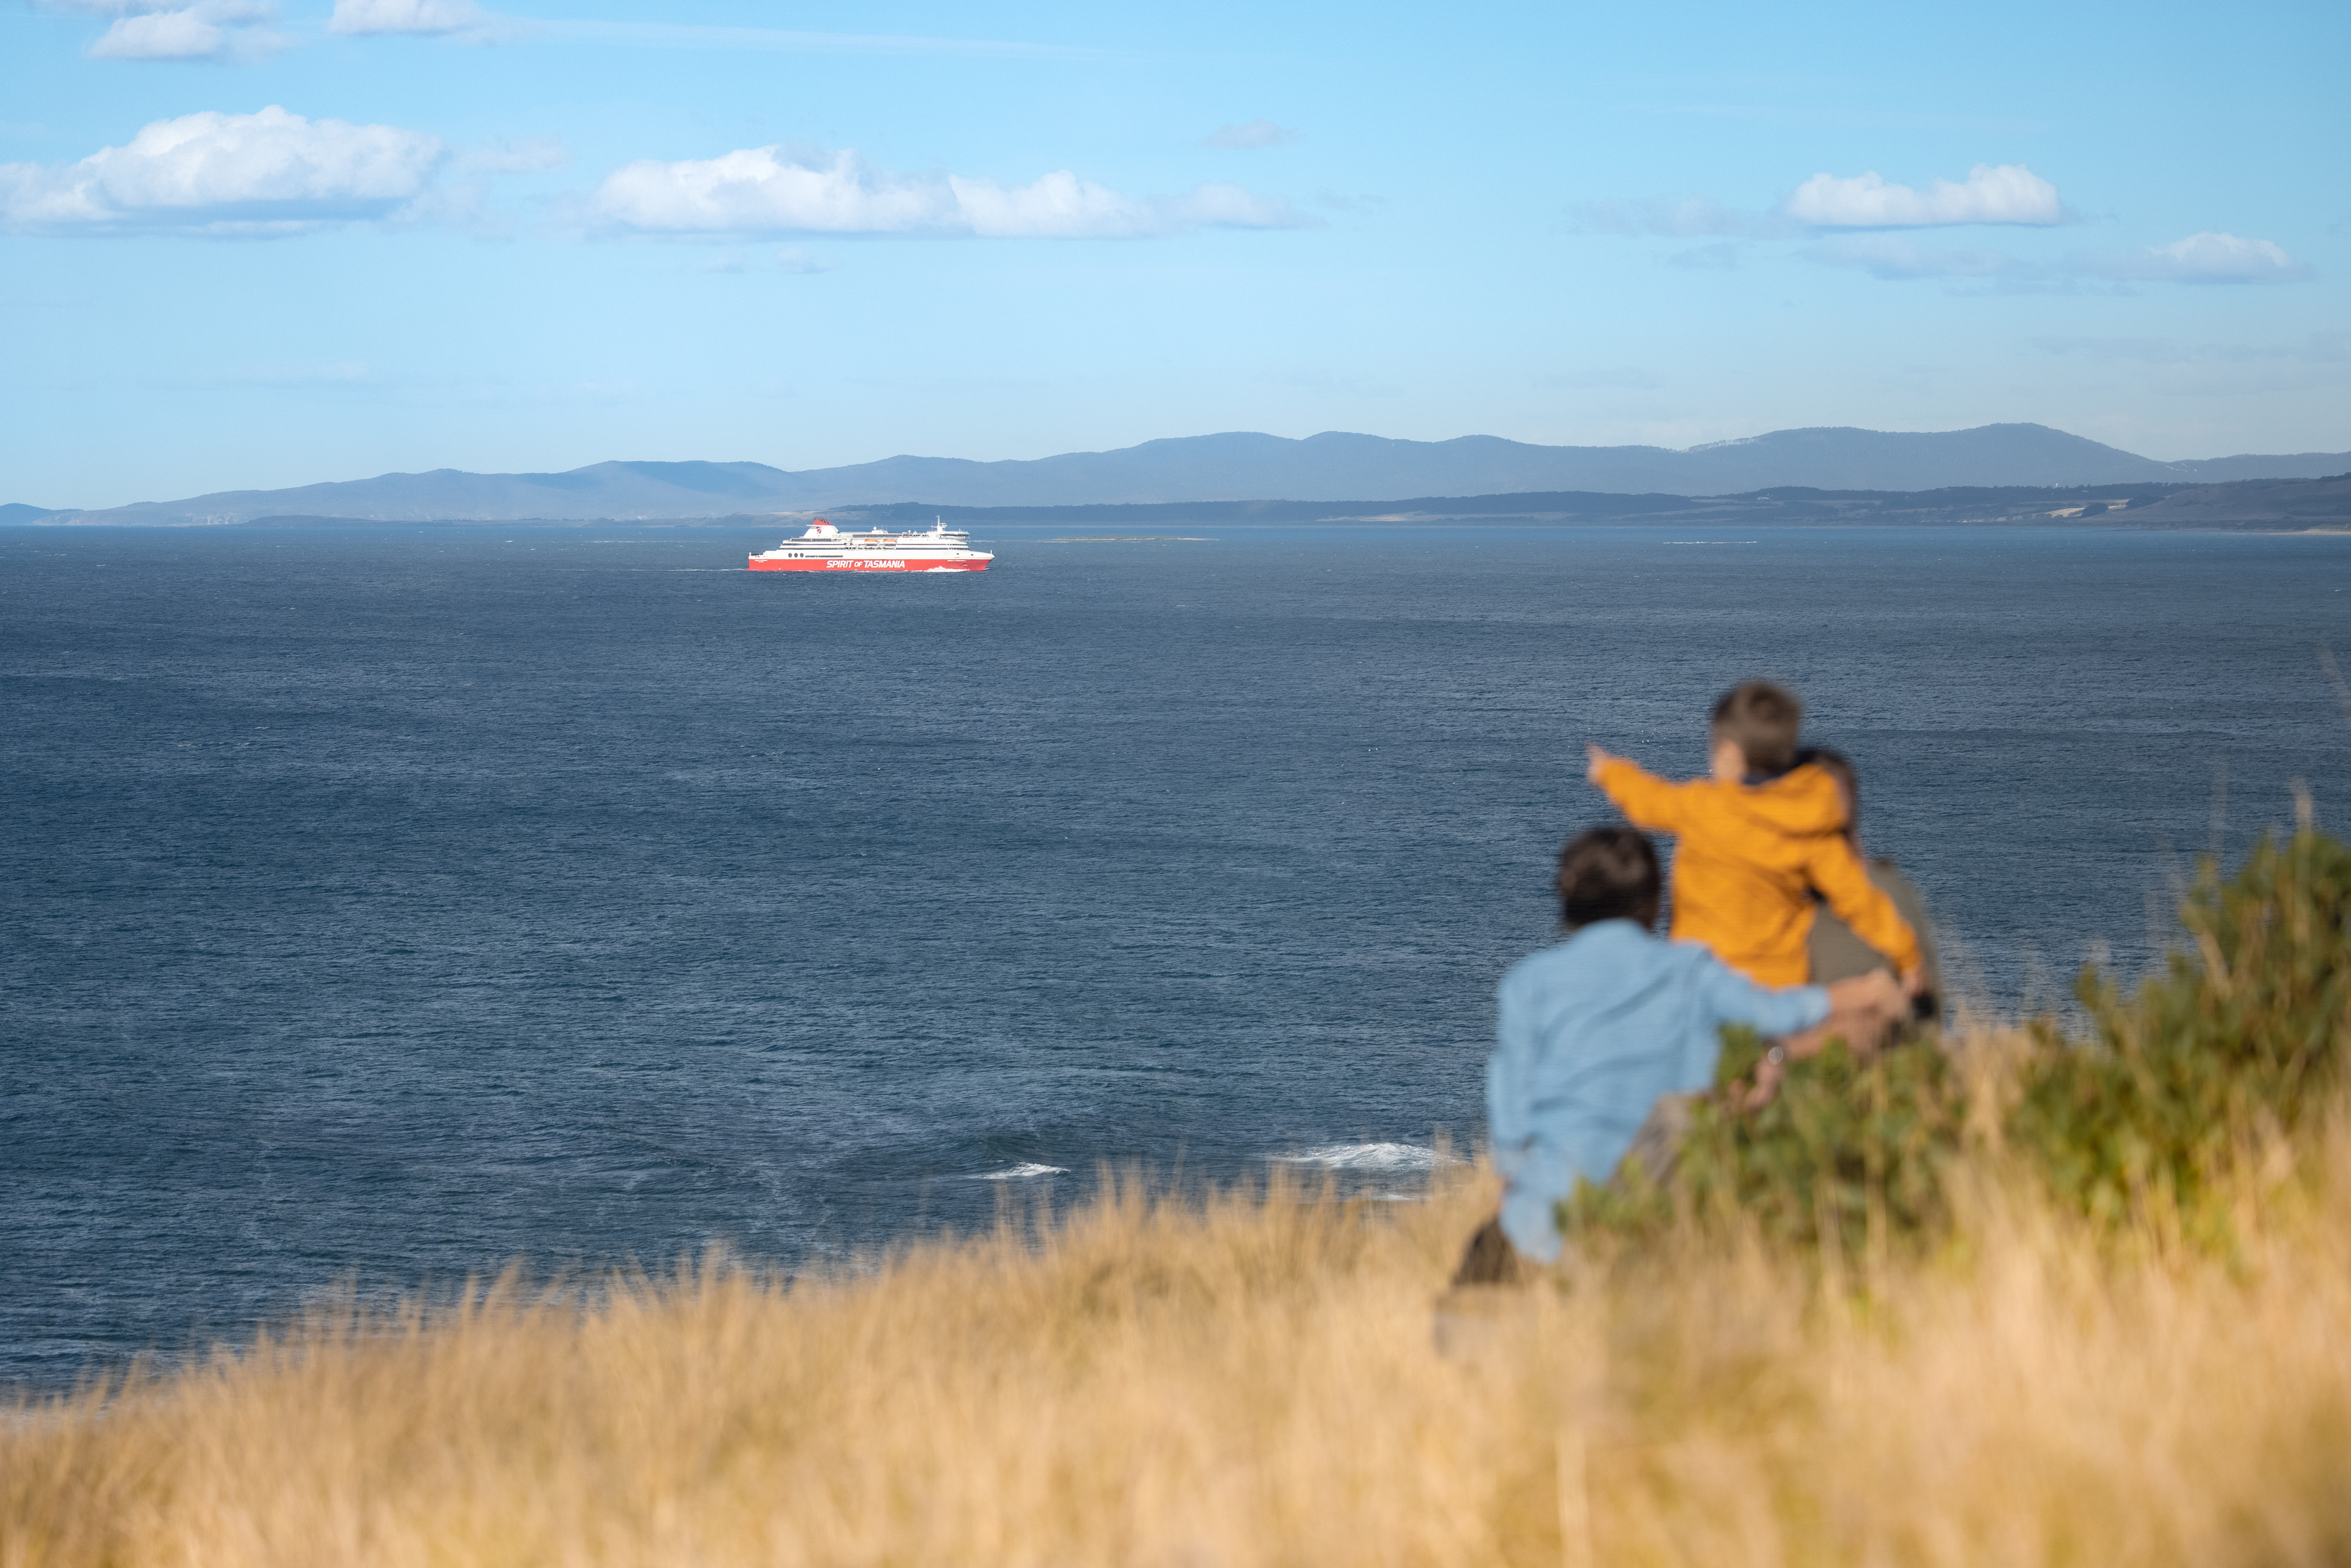 A mother and son sit by the coastline of Don Heads, with the boy pointing out to the Spirit of Tasmania, cruise ship.